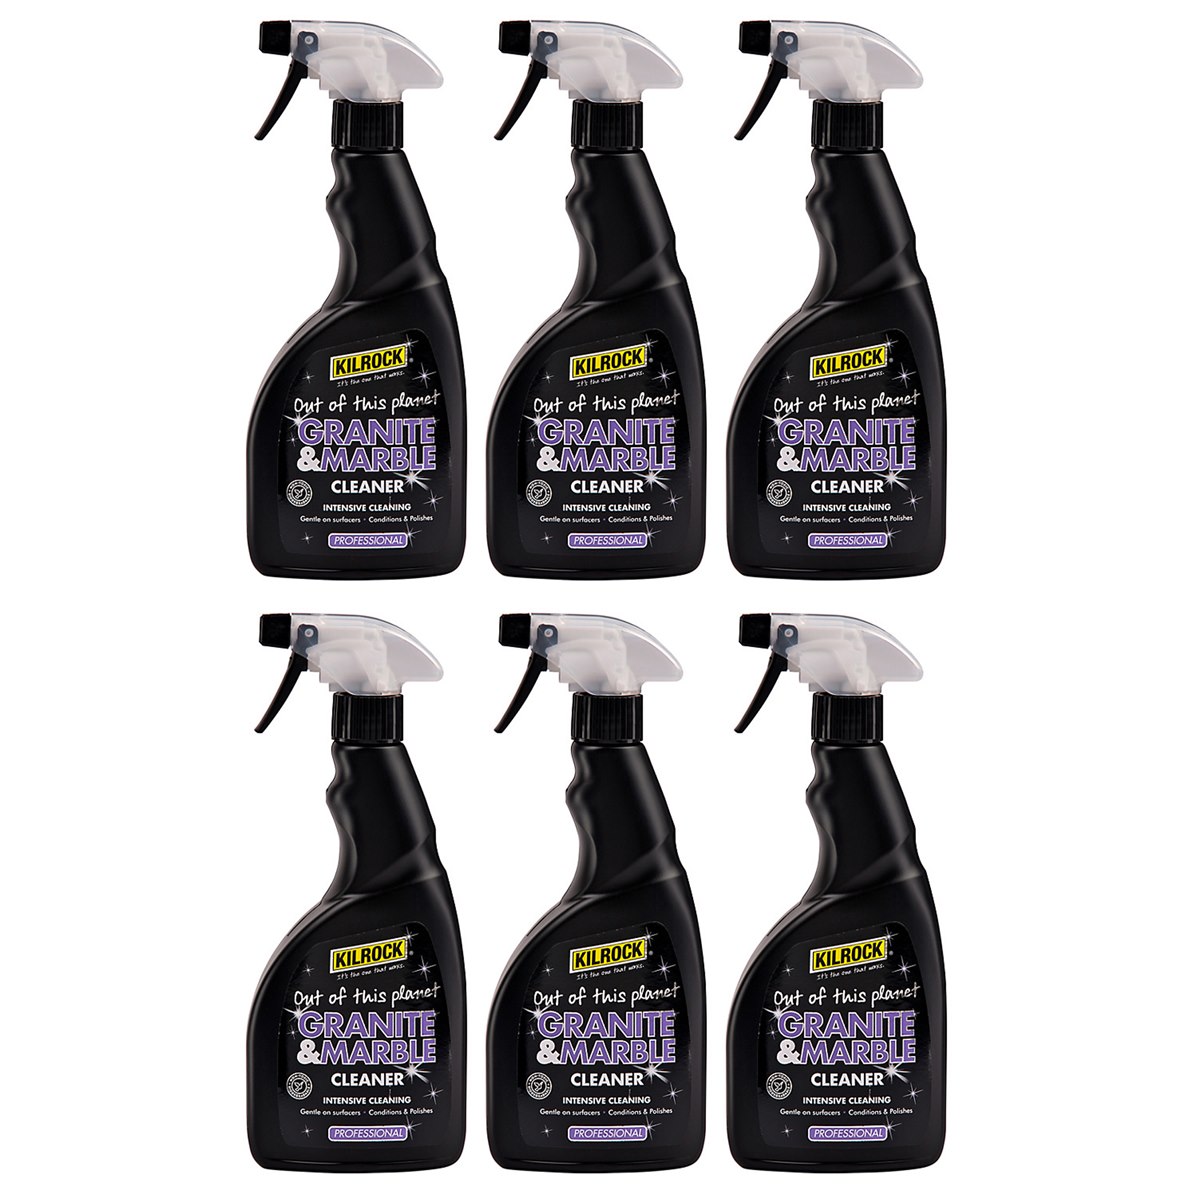 Case of 6 x Kilrock Granite and Marble Cleaner Spray 500ml